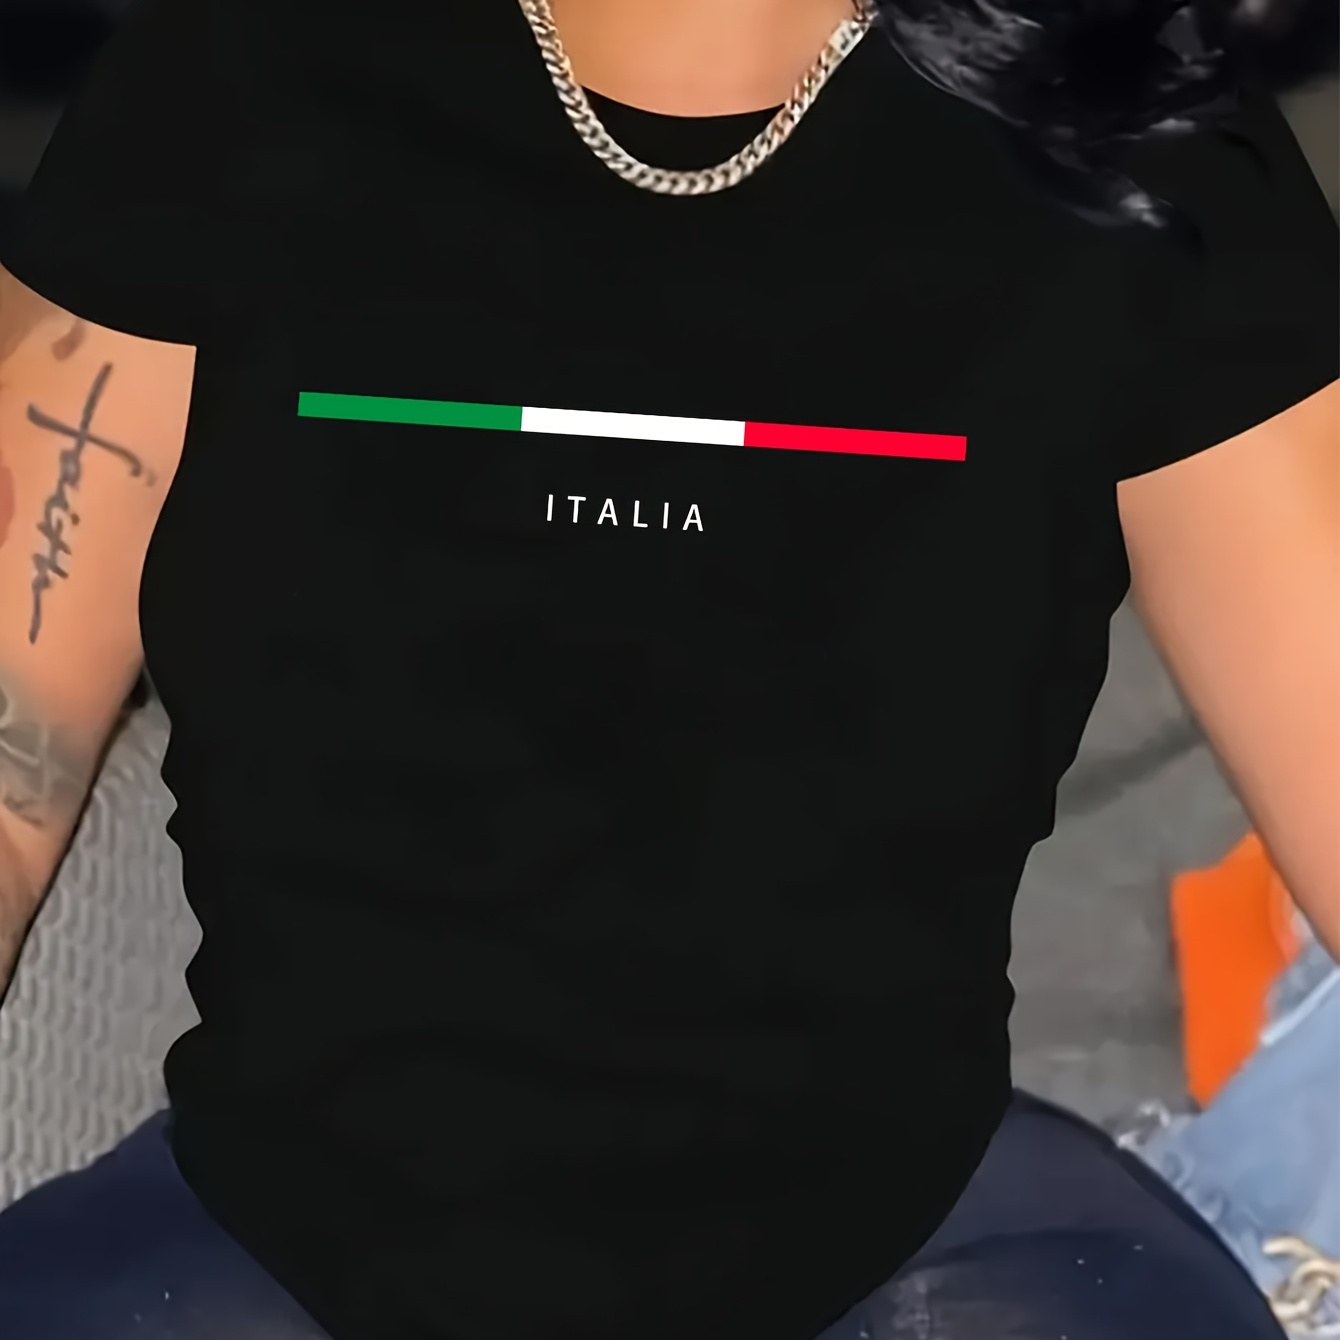 

Italia Letter & Graphic Print T-shirt, Short Sleeve Crew Neck Casual Top For Summer & Spring, Women's Clothing